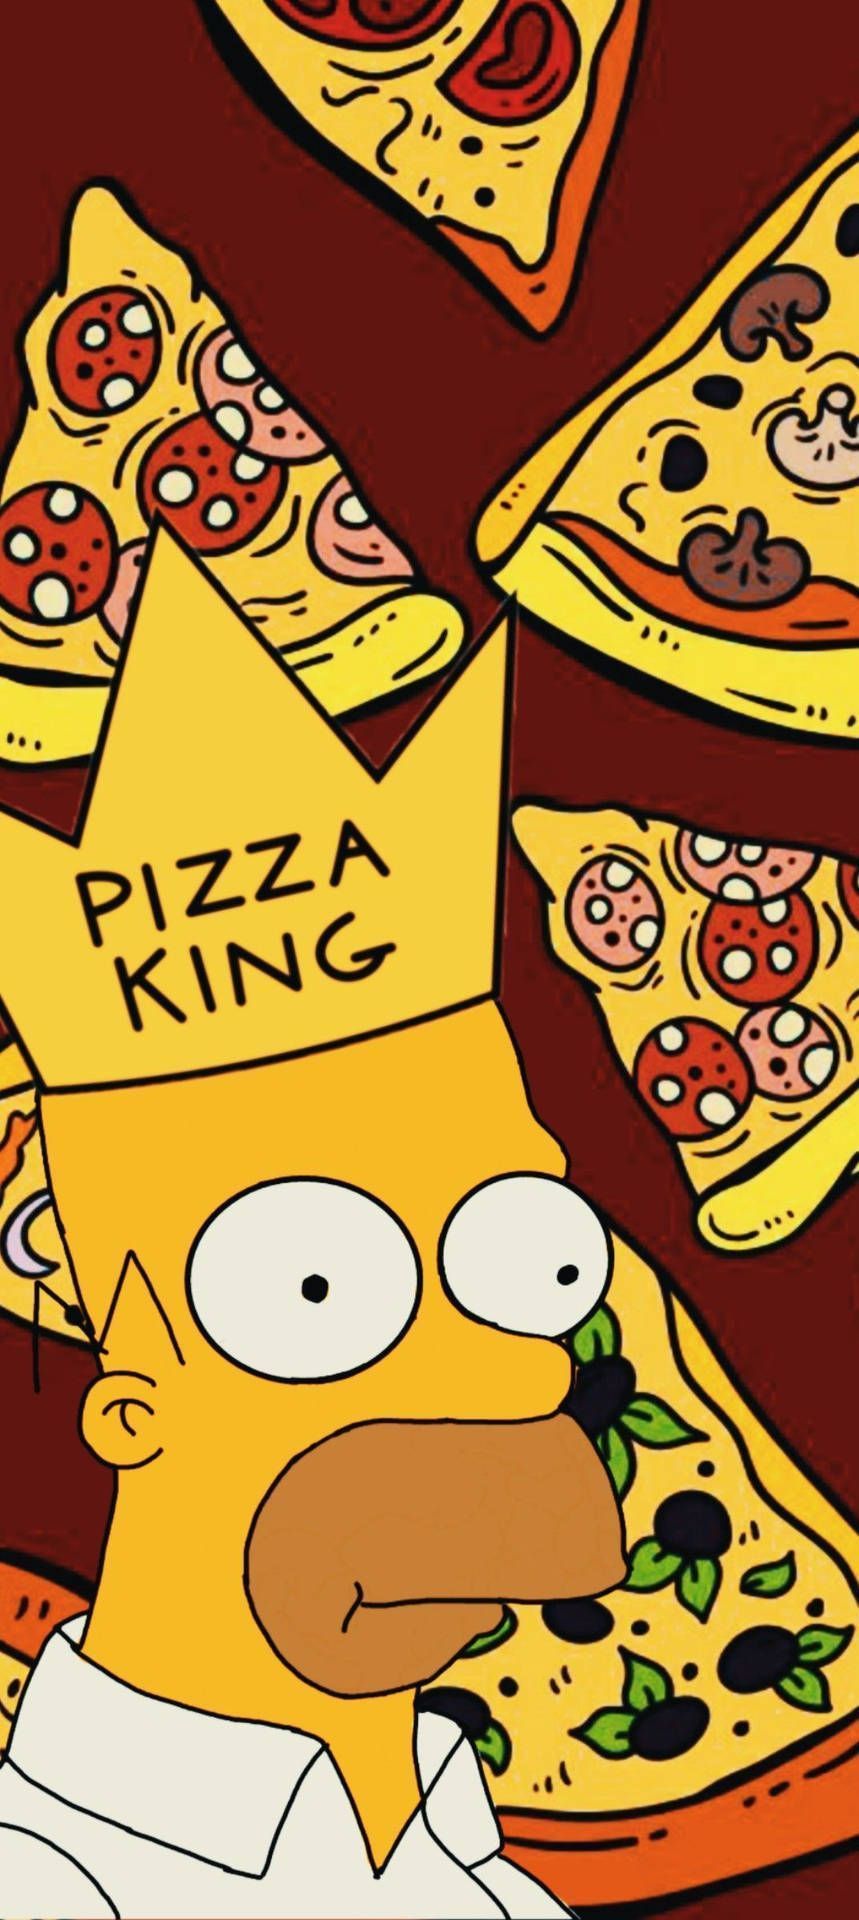 Homer Simpson with a Pizza King crown and slices of pizza - Pizza